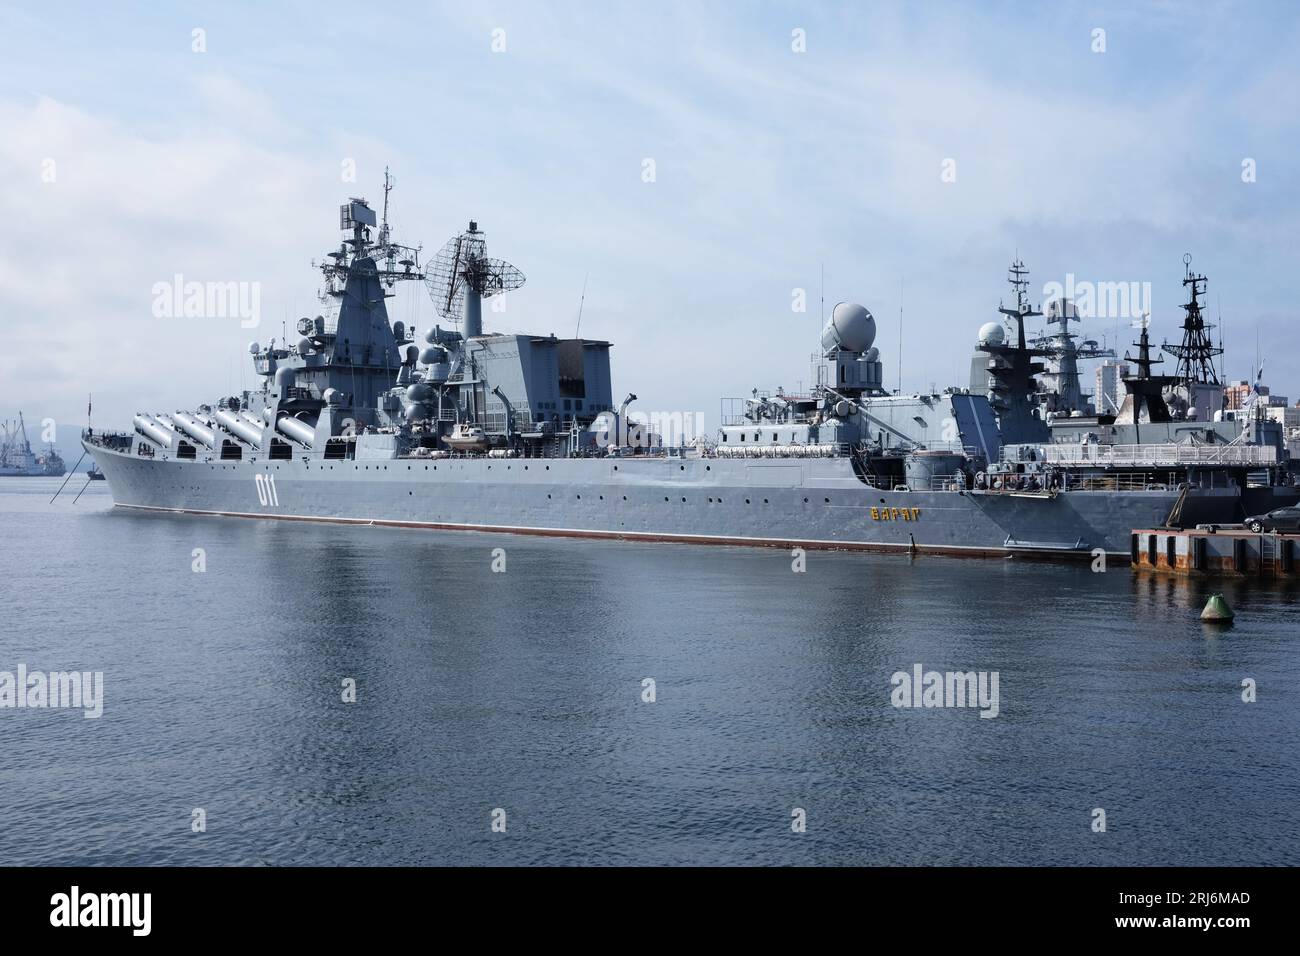 The Varyag missile cruiser parked in the port of Vladivostok, Russia Stock Photo